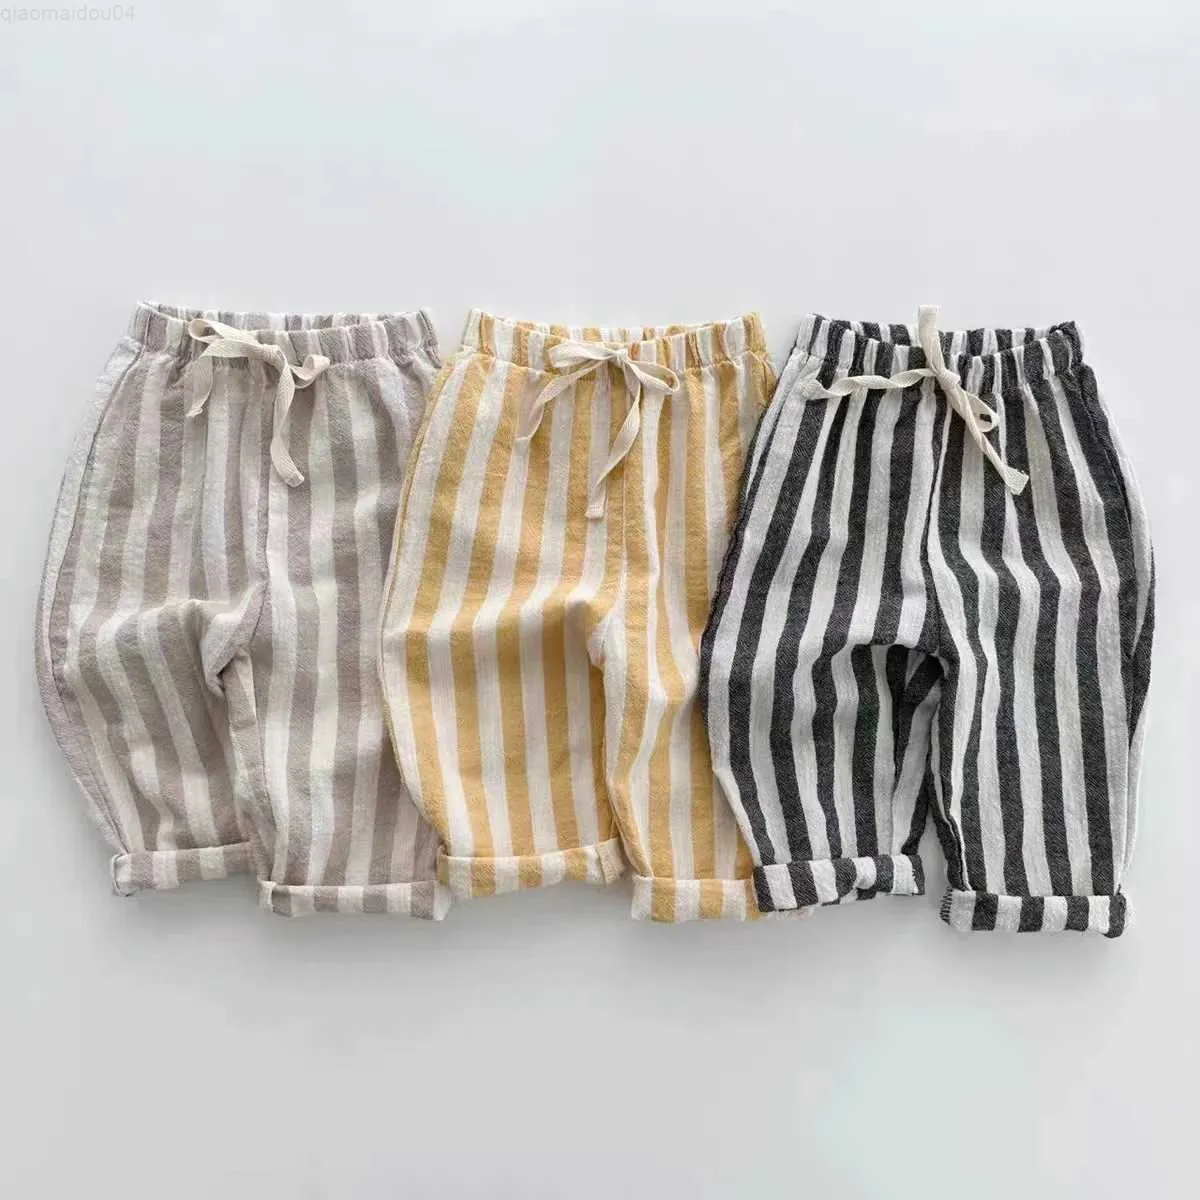 Trousers K230124 Children Summer and Spring Clothing Childrens New Soft Stripe Jogging Pants Newborn Loose Baby Plush Pants Suitable for Young Boys and GirlsL2404